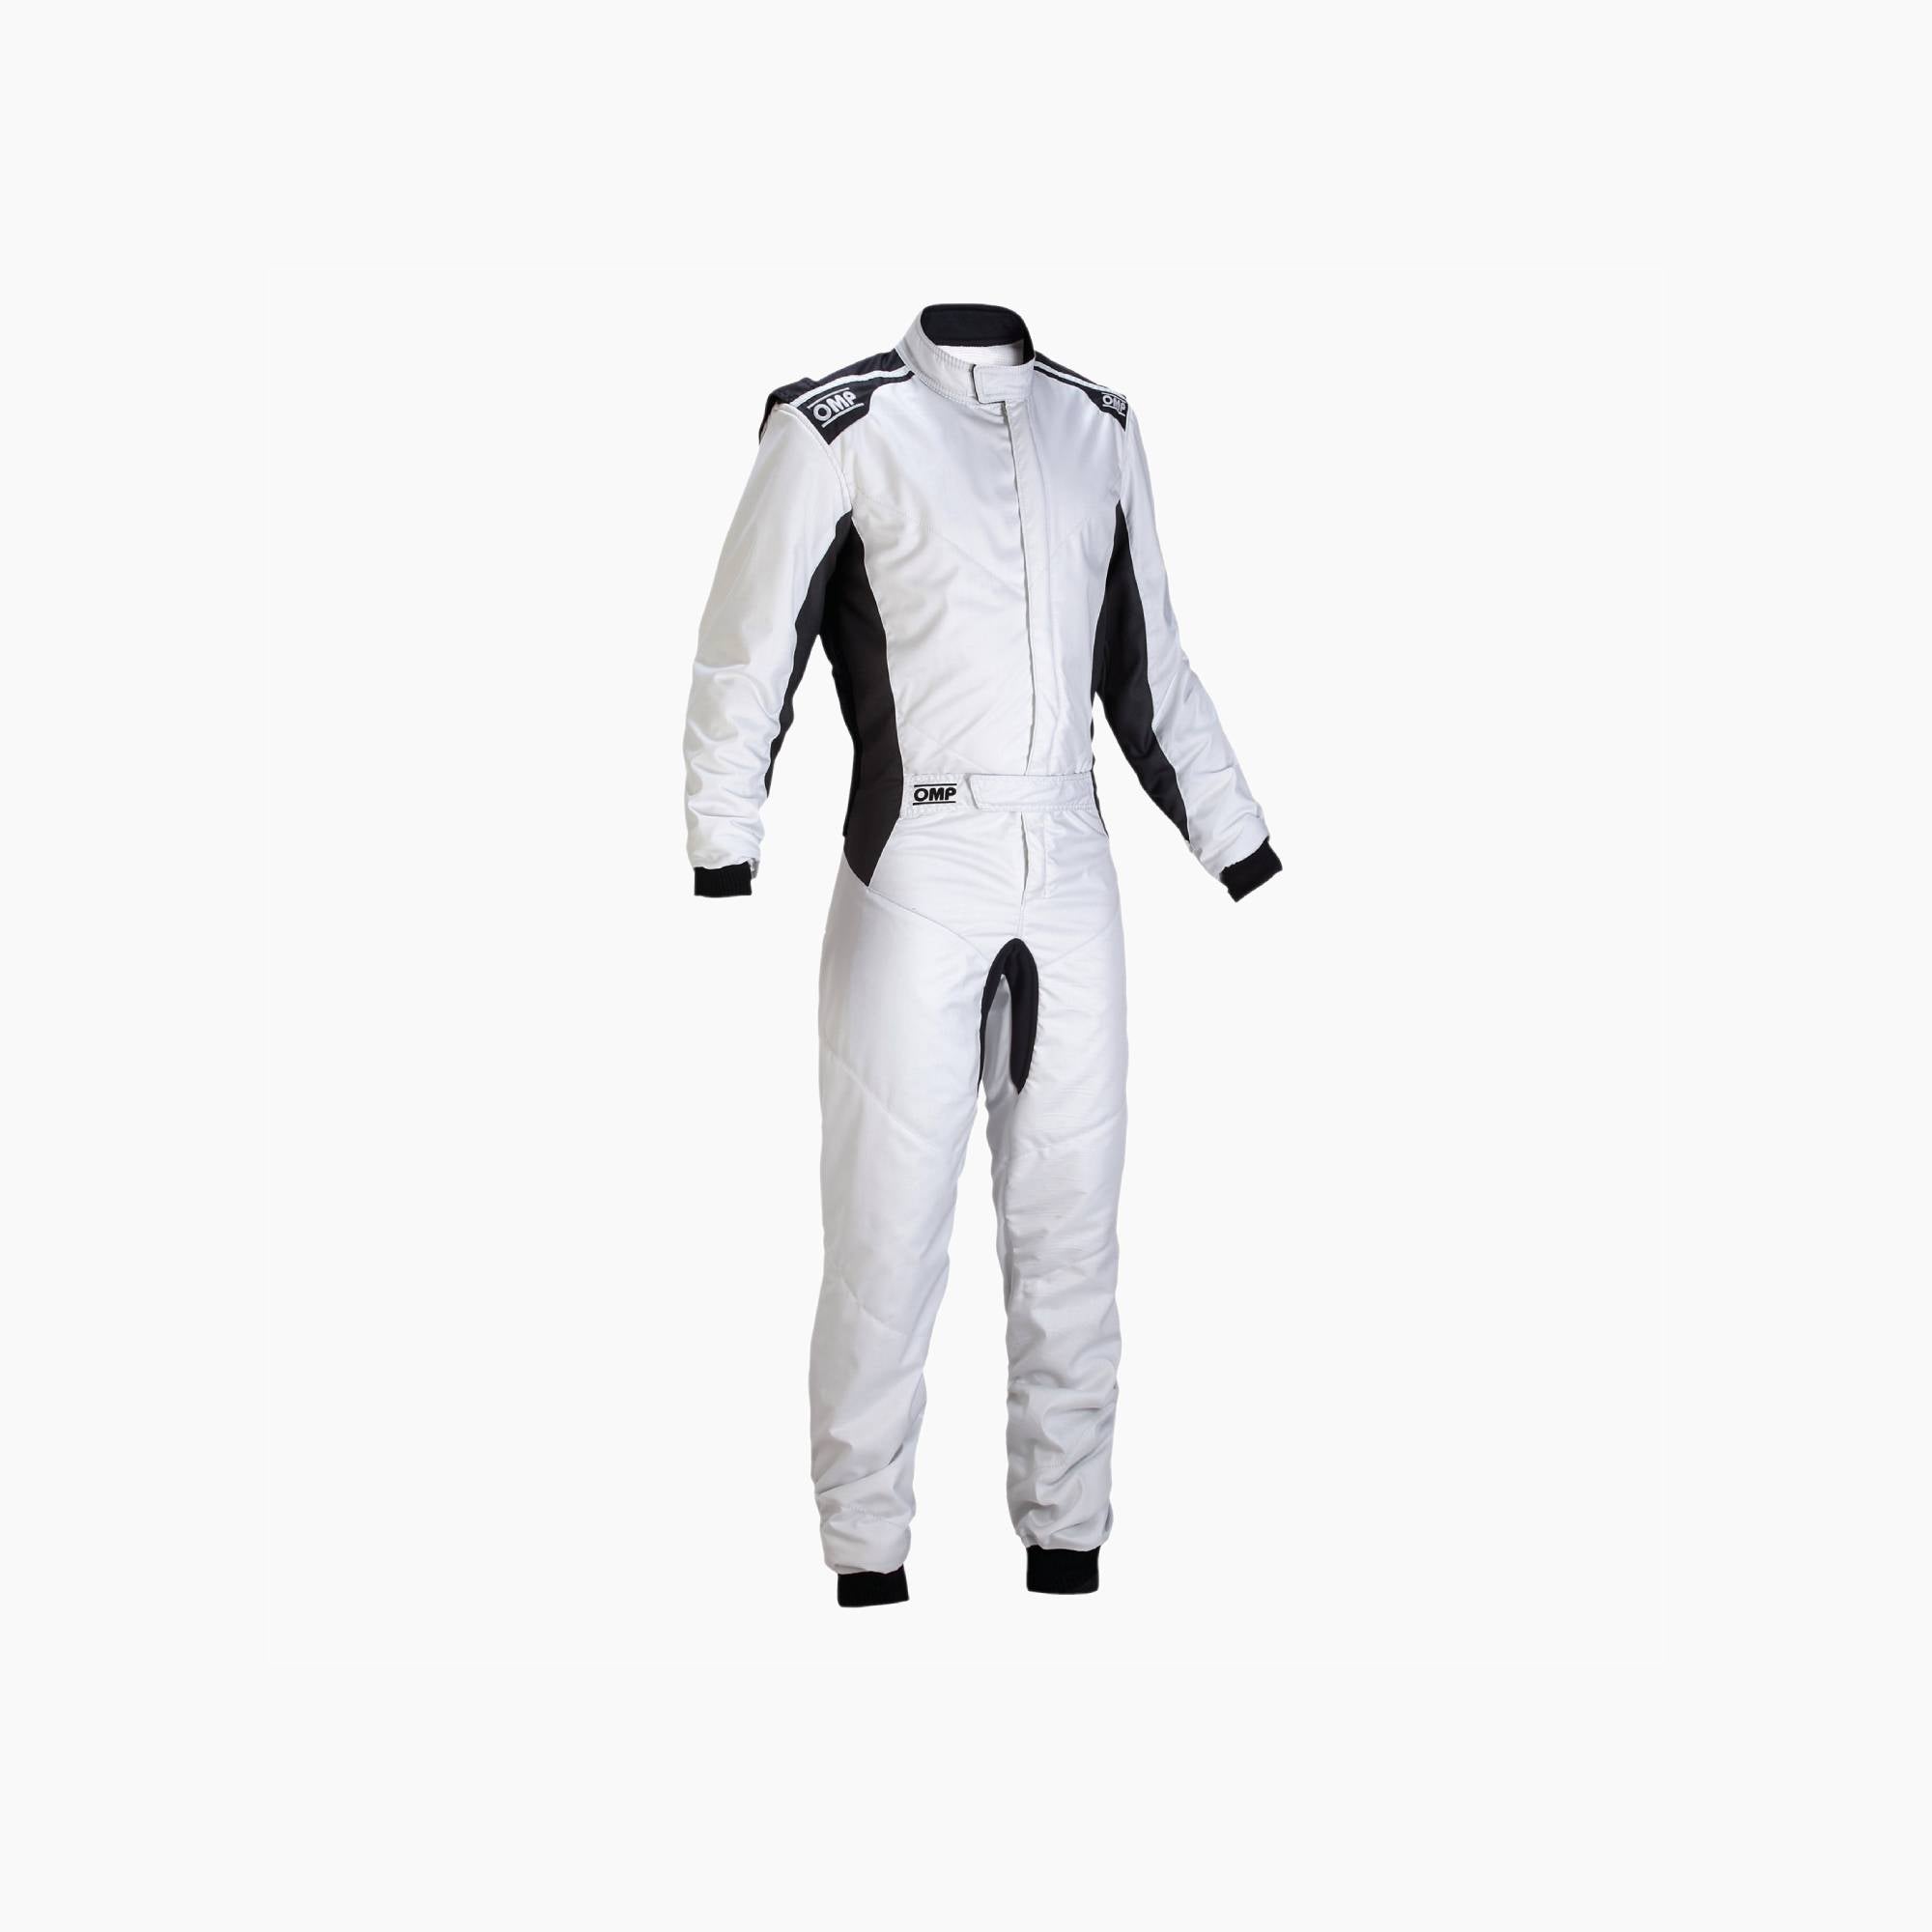 OMP | ONE-S Racing Suit-Racing Suit-OMP-gpx-store